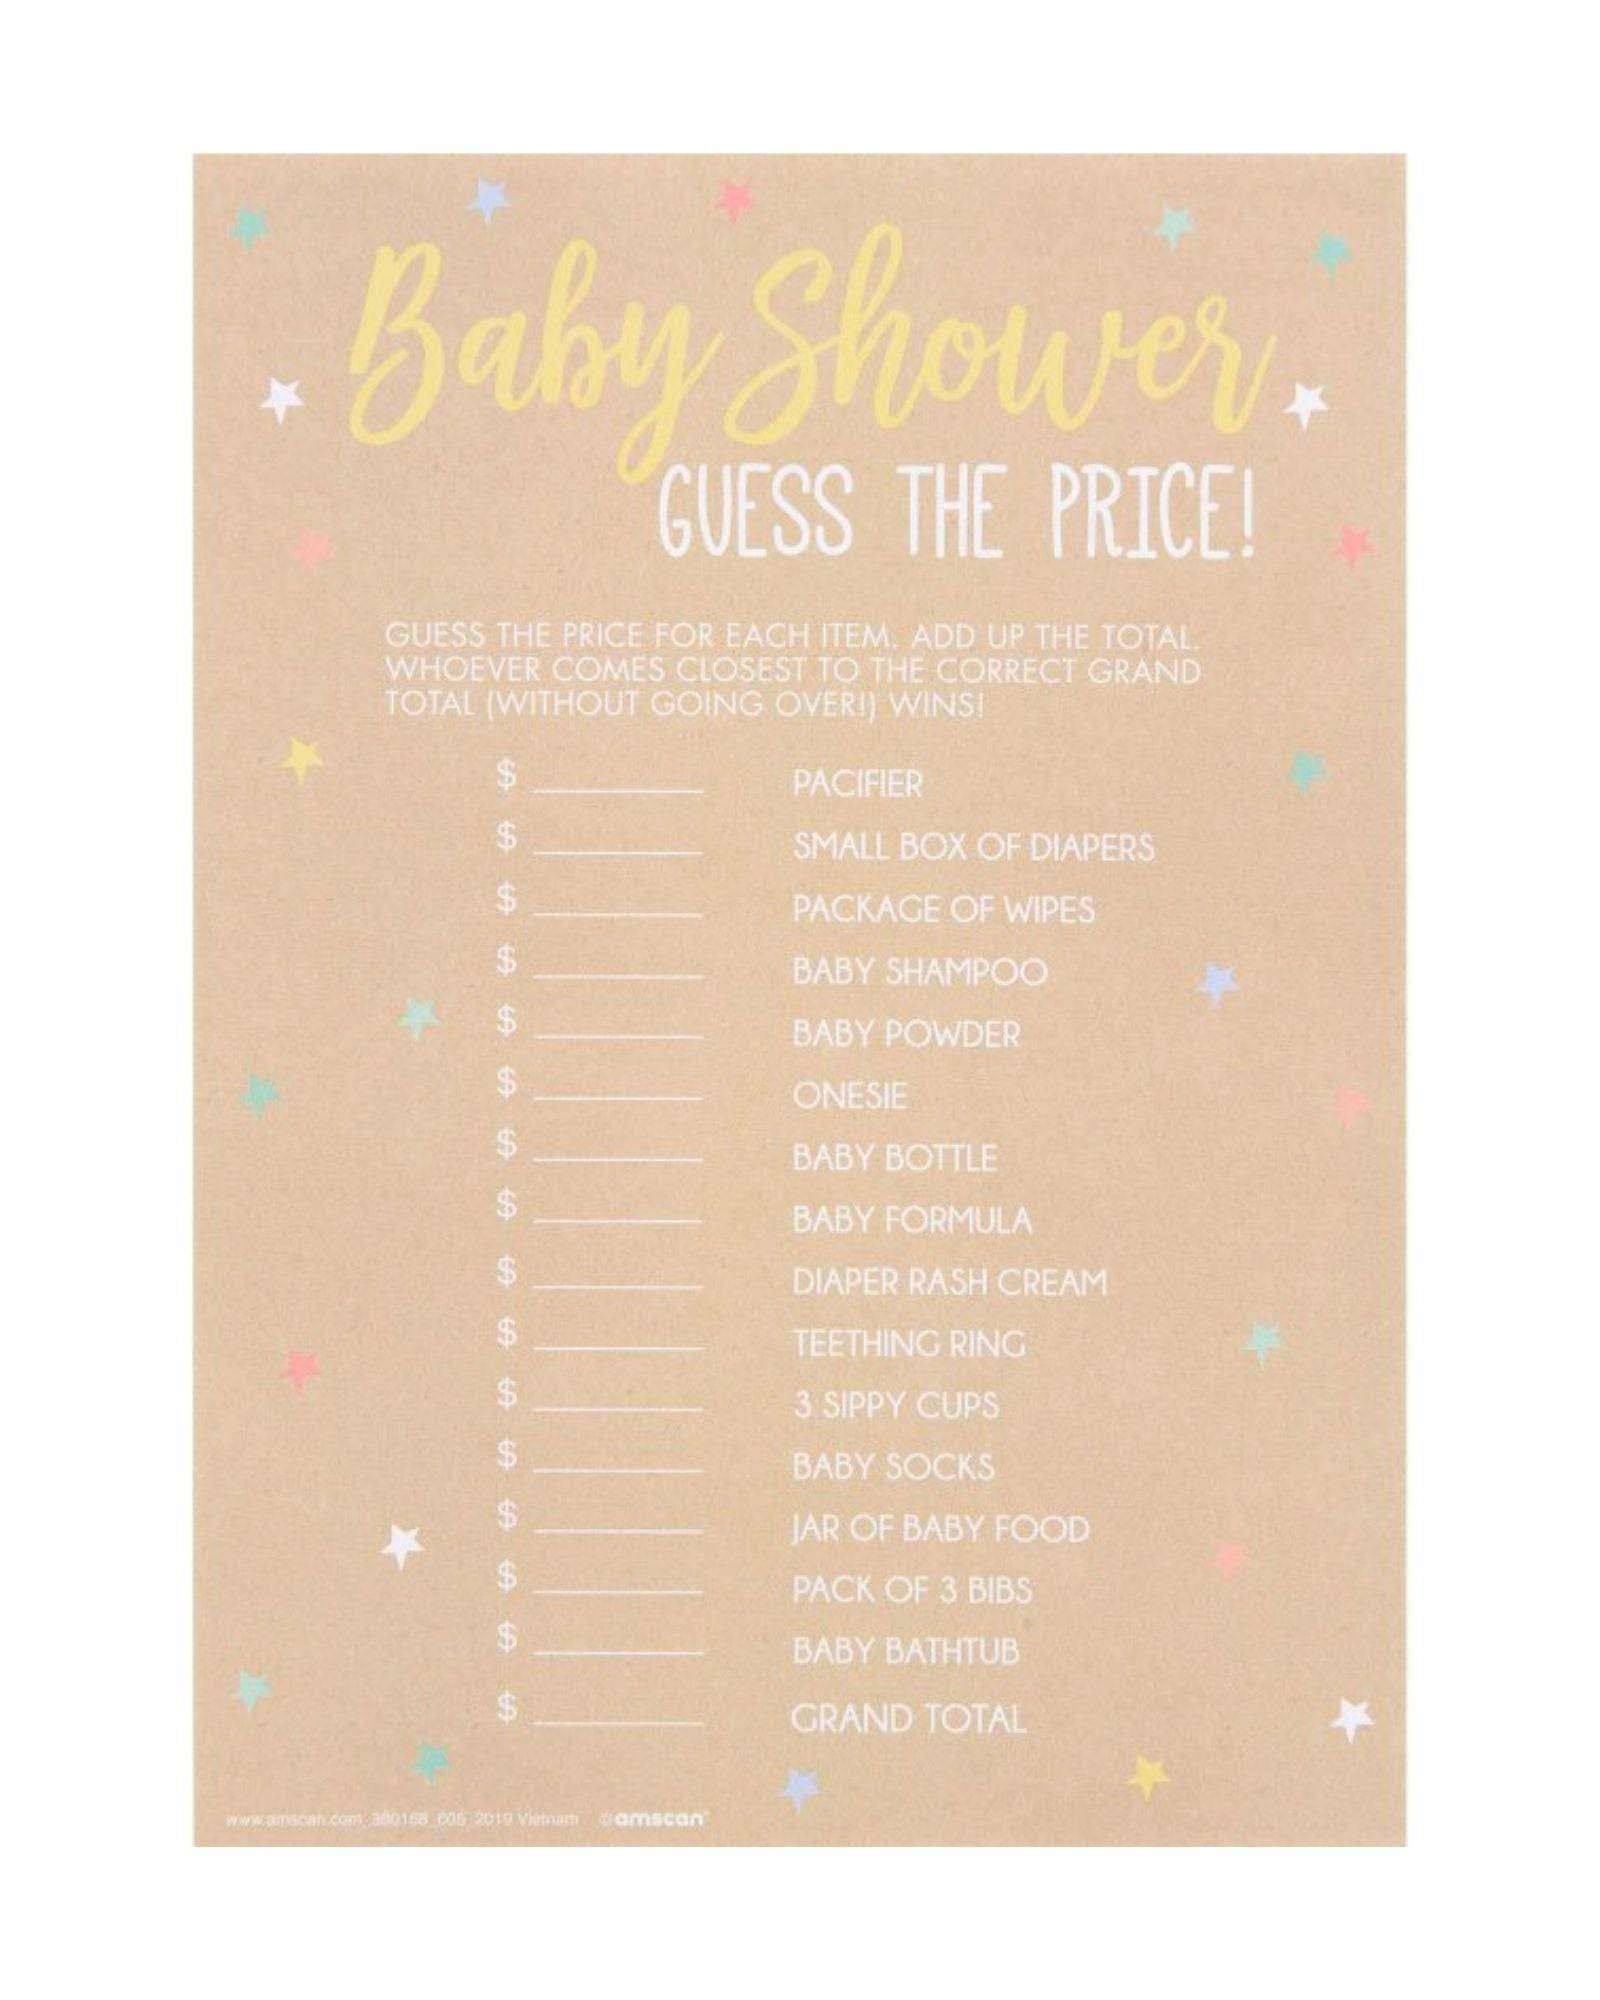 20 Whats In Your Purse Printable | Easy baby shower games, Simple baby  shower, Baby shower games